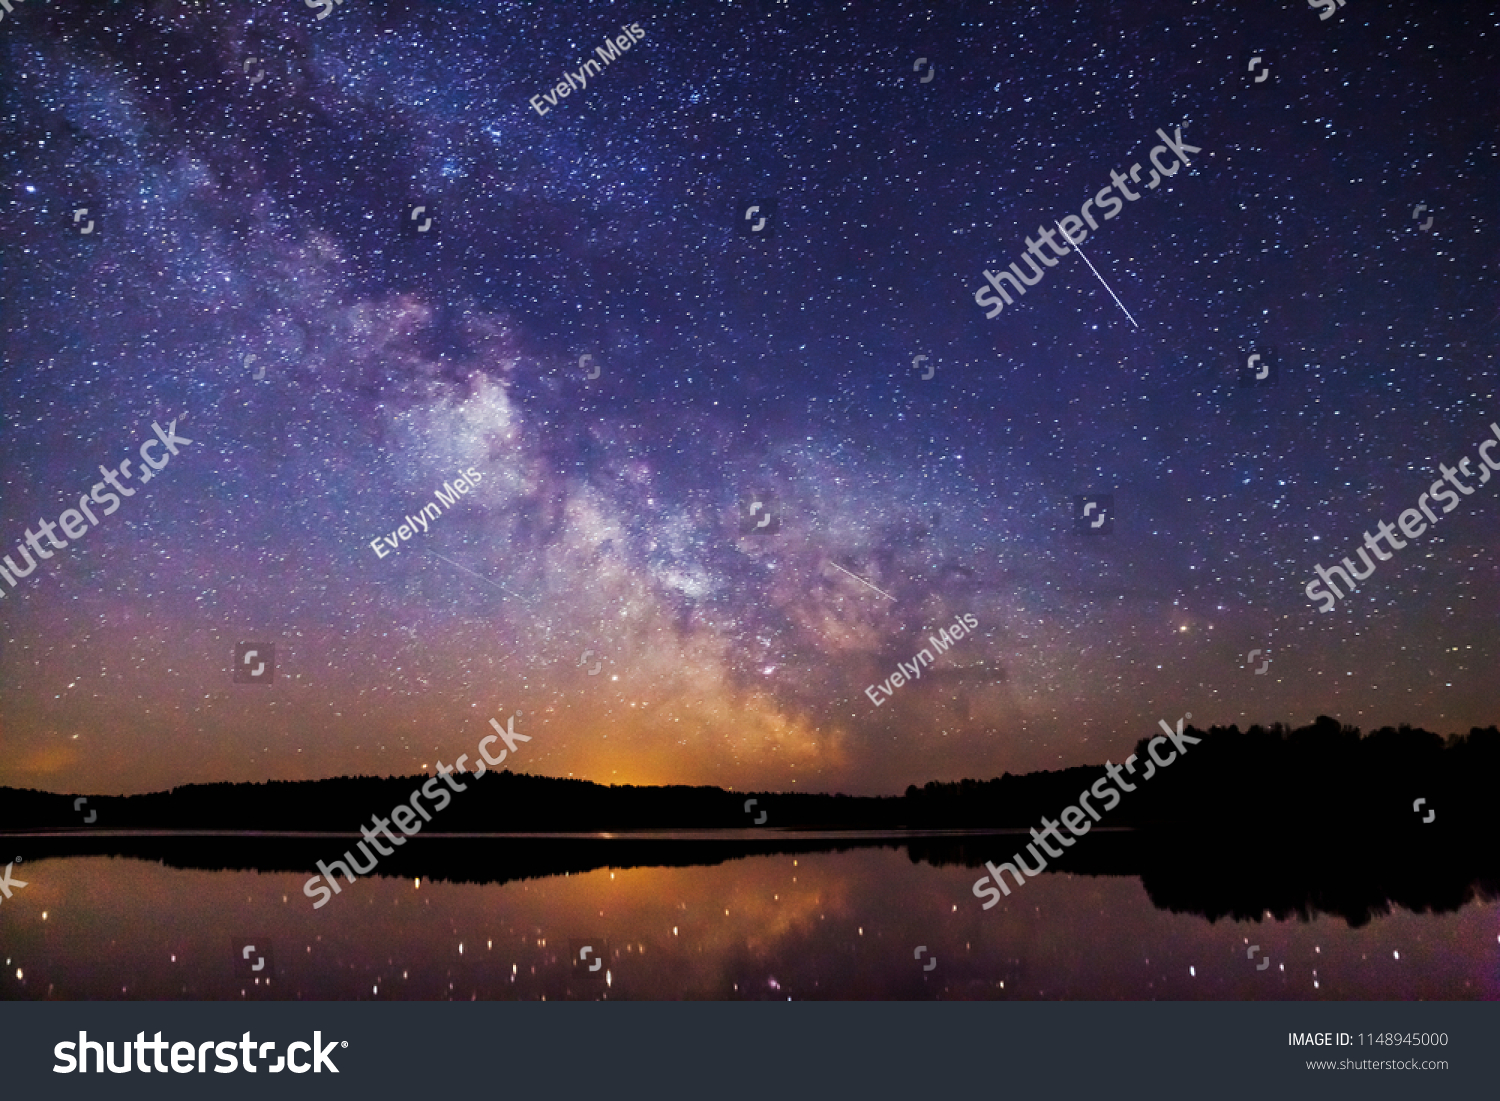 Landscape with Milky way galaxy. Night sky with stars. #1148945000